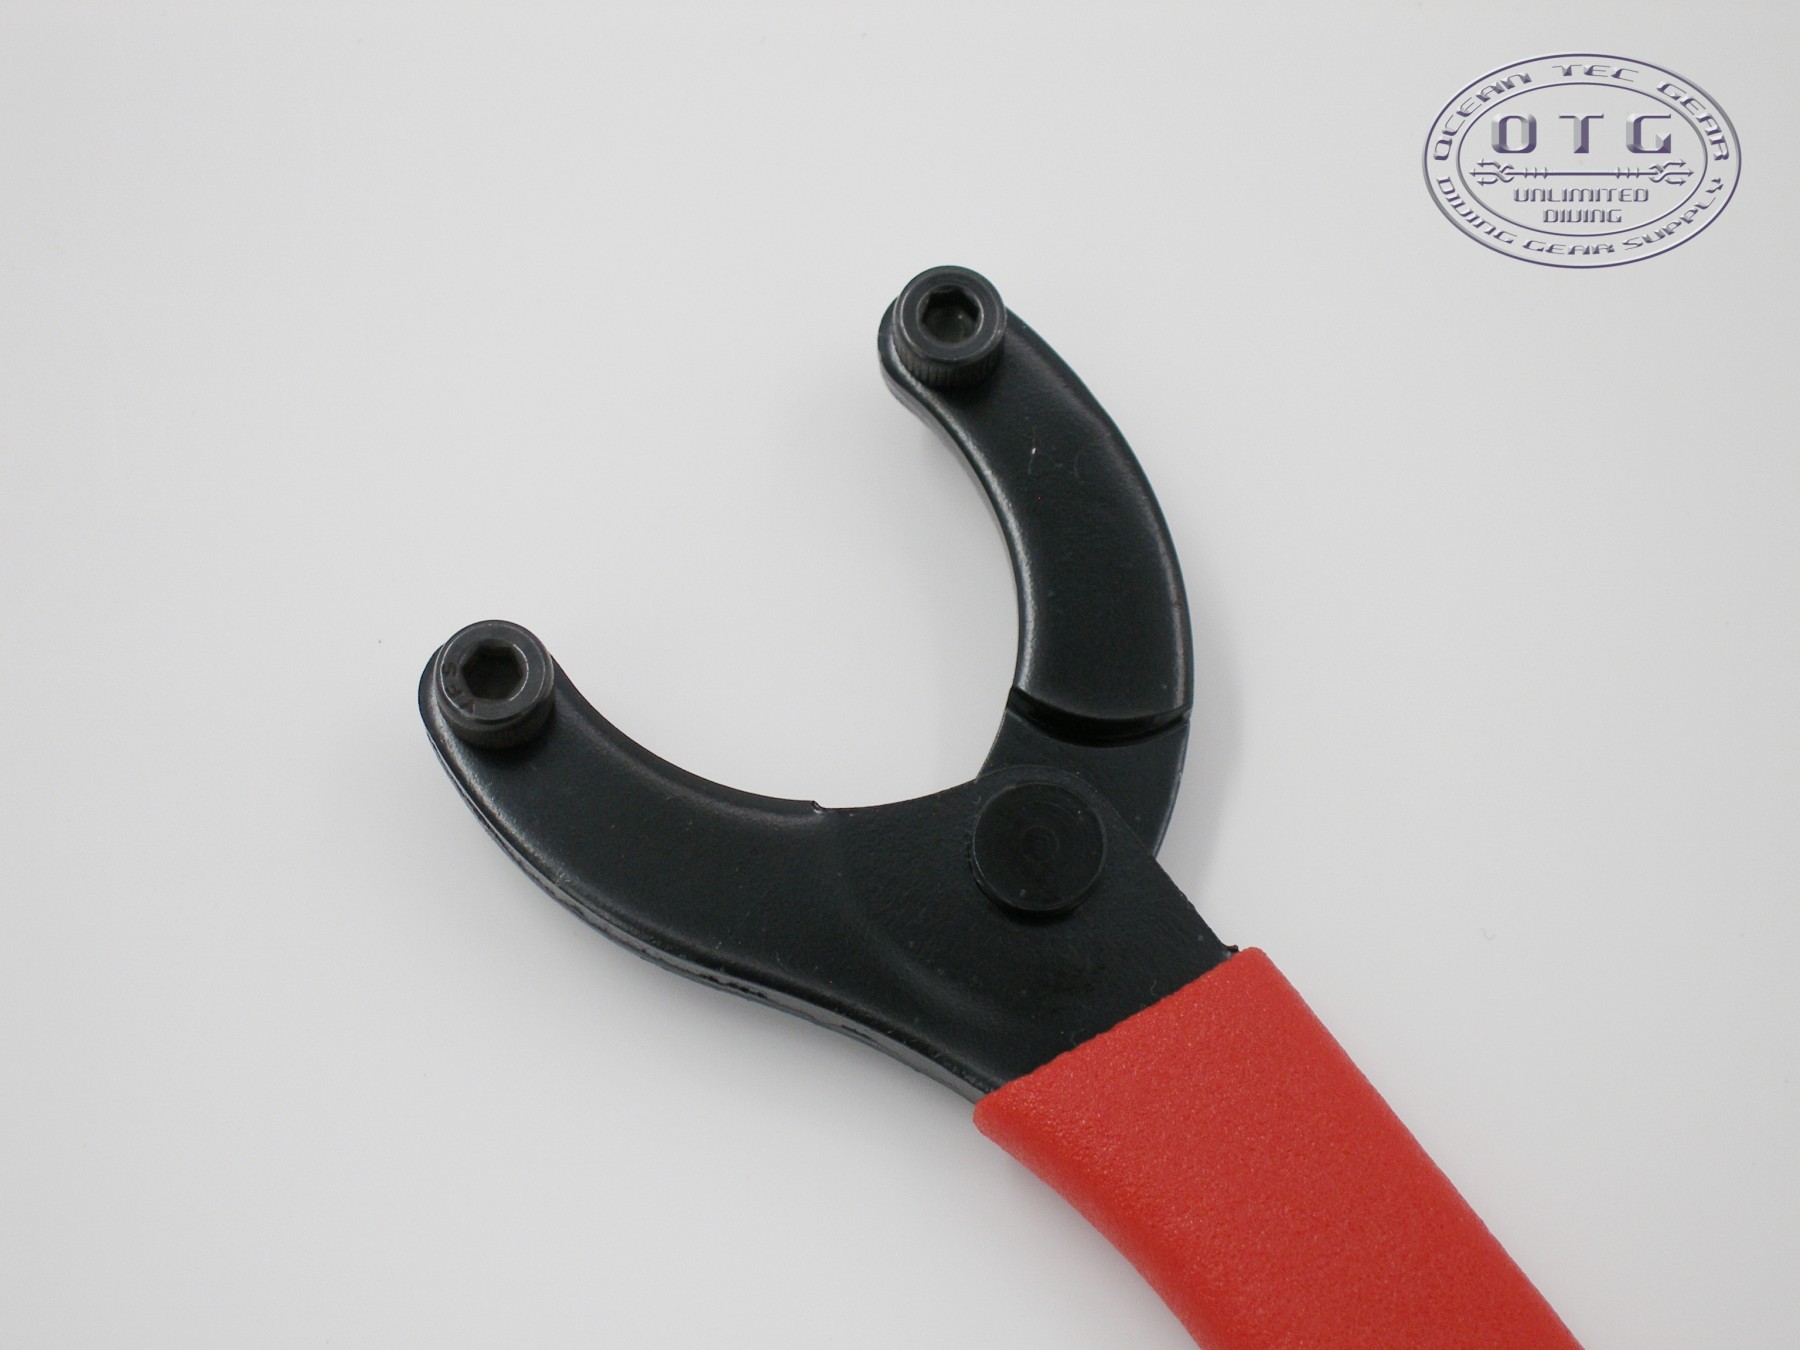 Scuba Diving Small Pin Adjustable Spanner Wrench